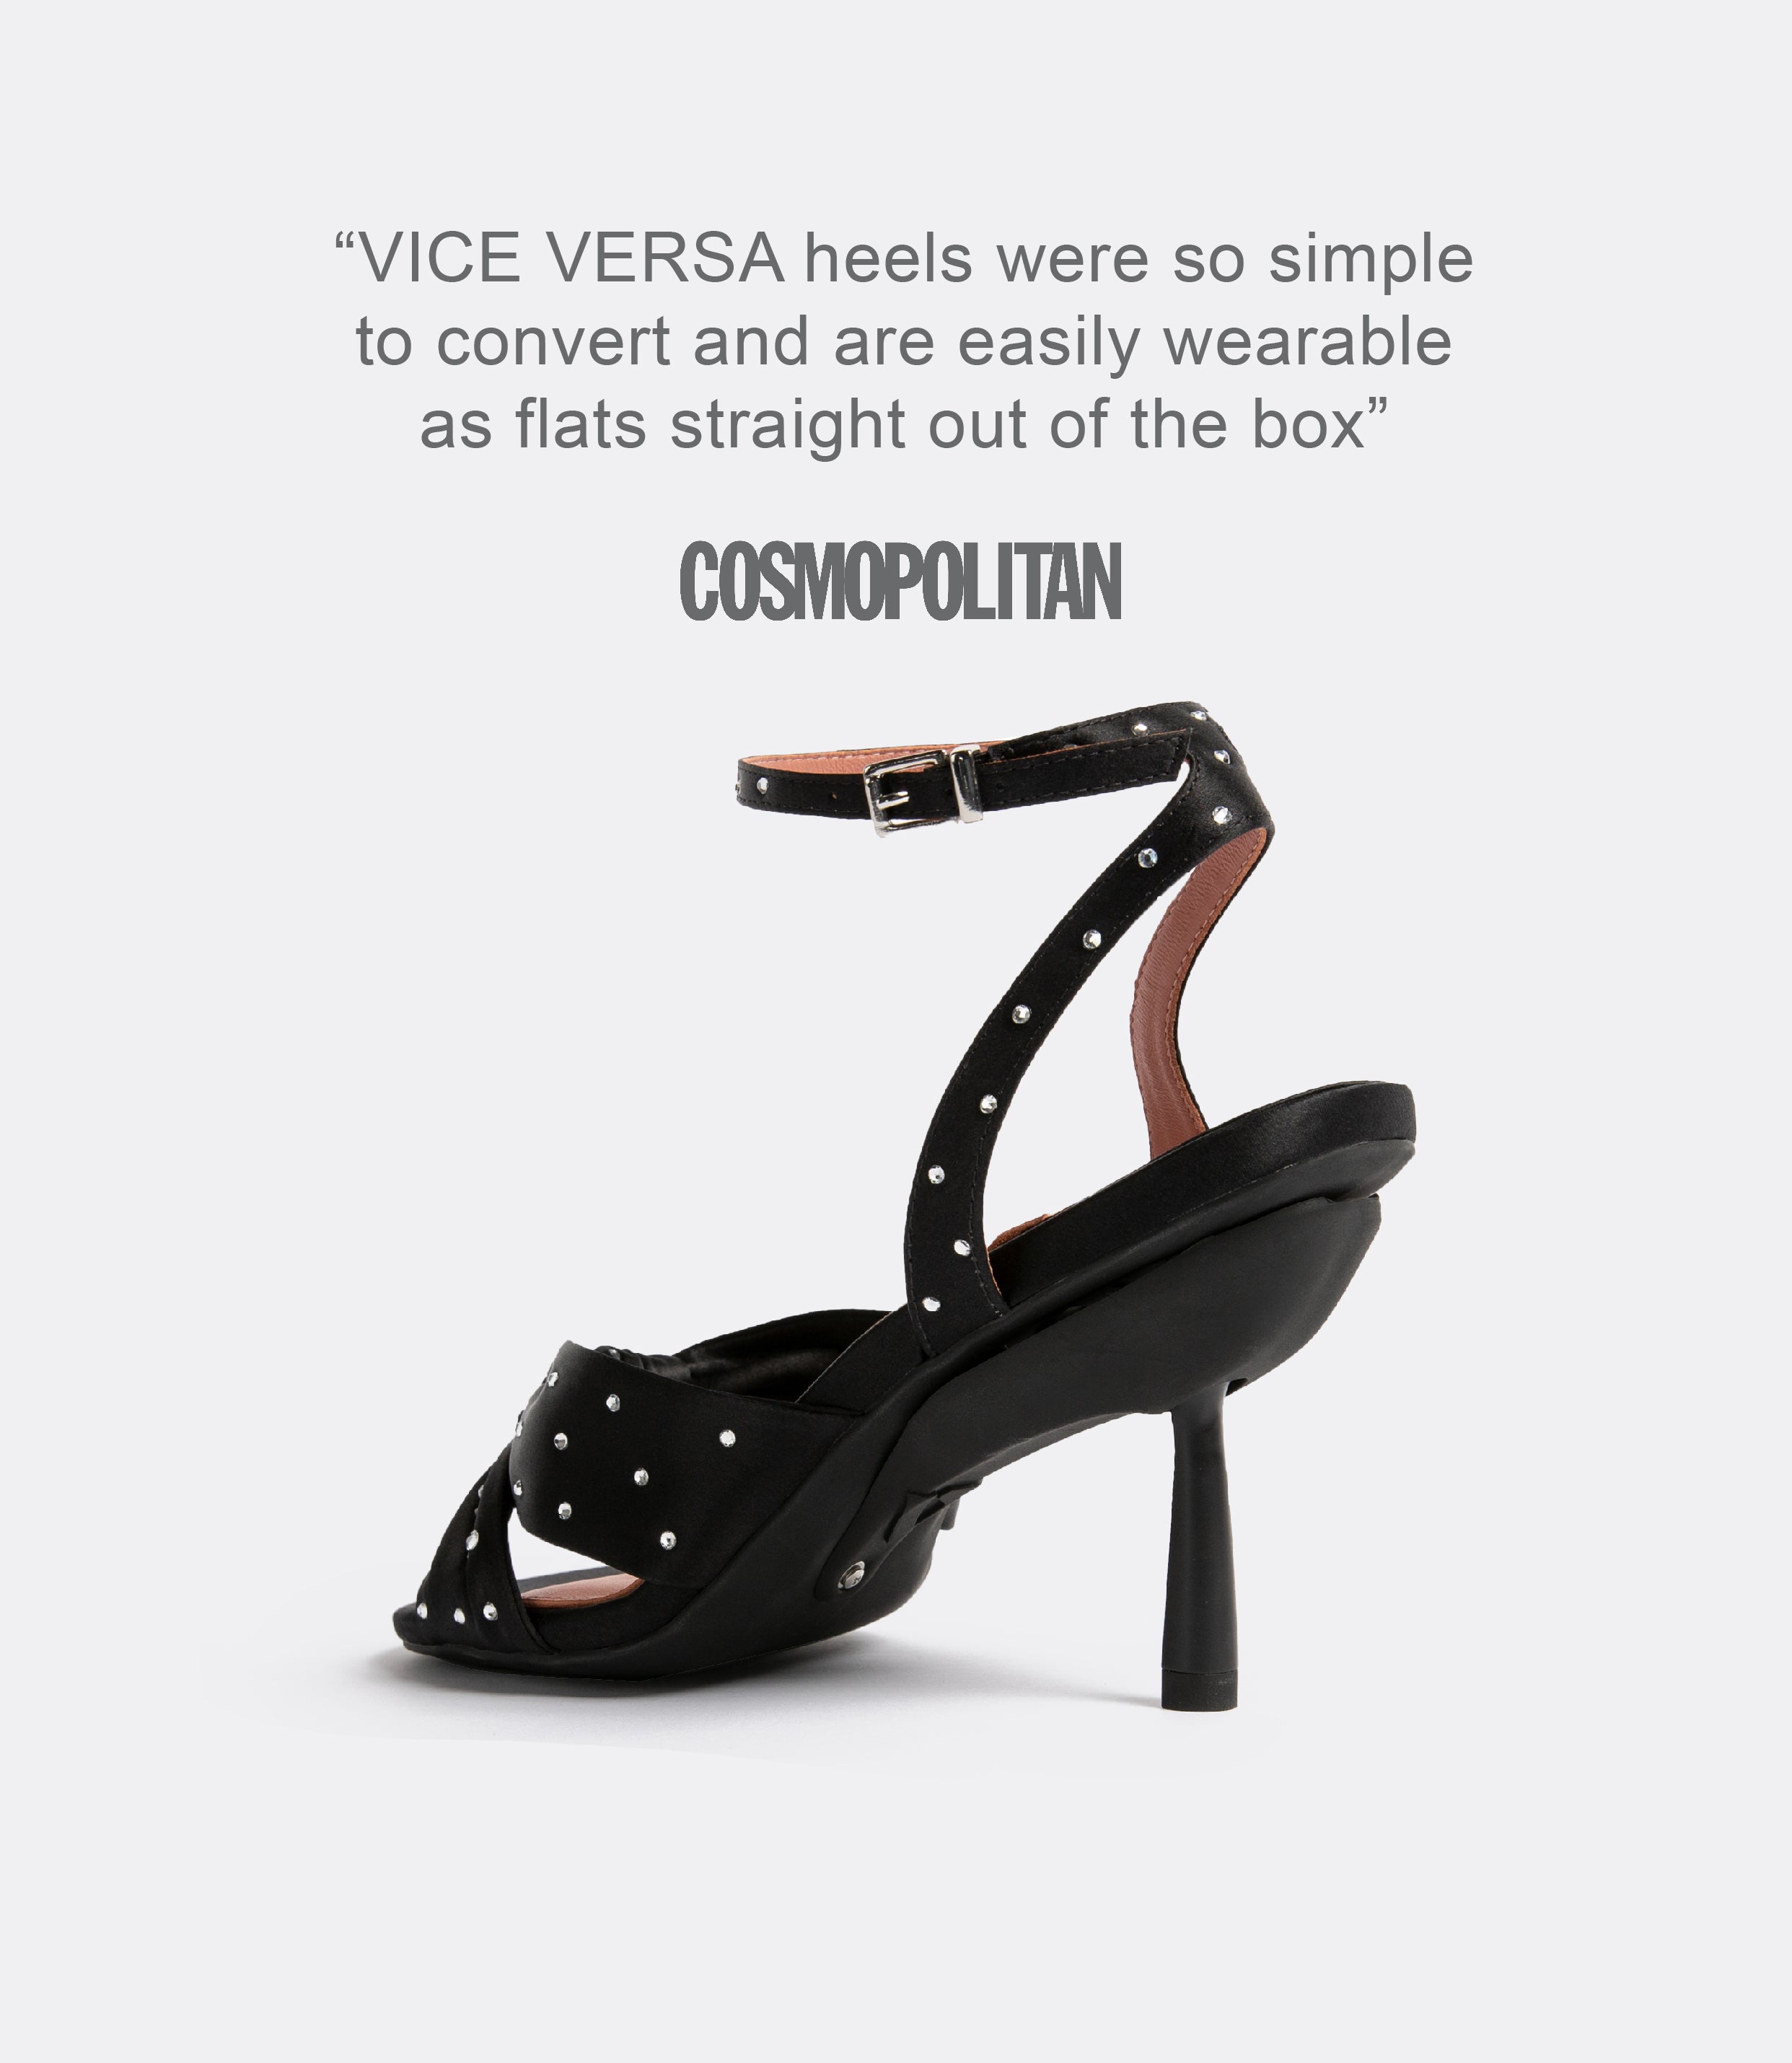 A quote from Cosmopolitan and a back view of a black silk crystal sandal.